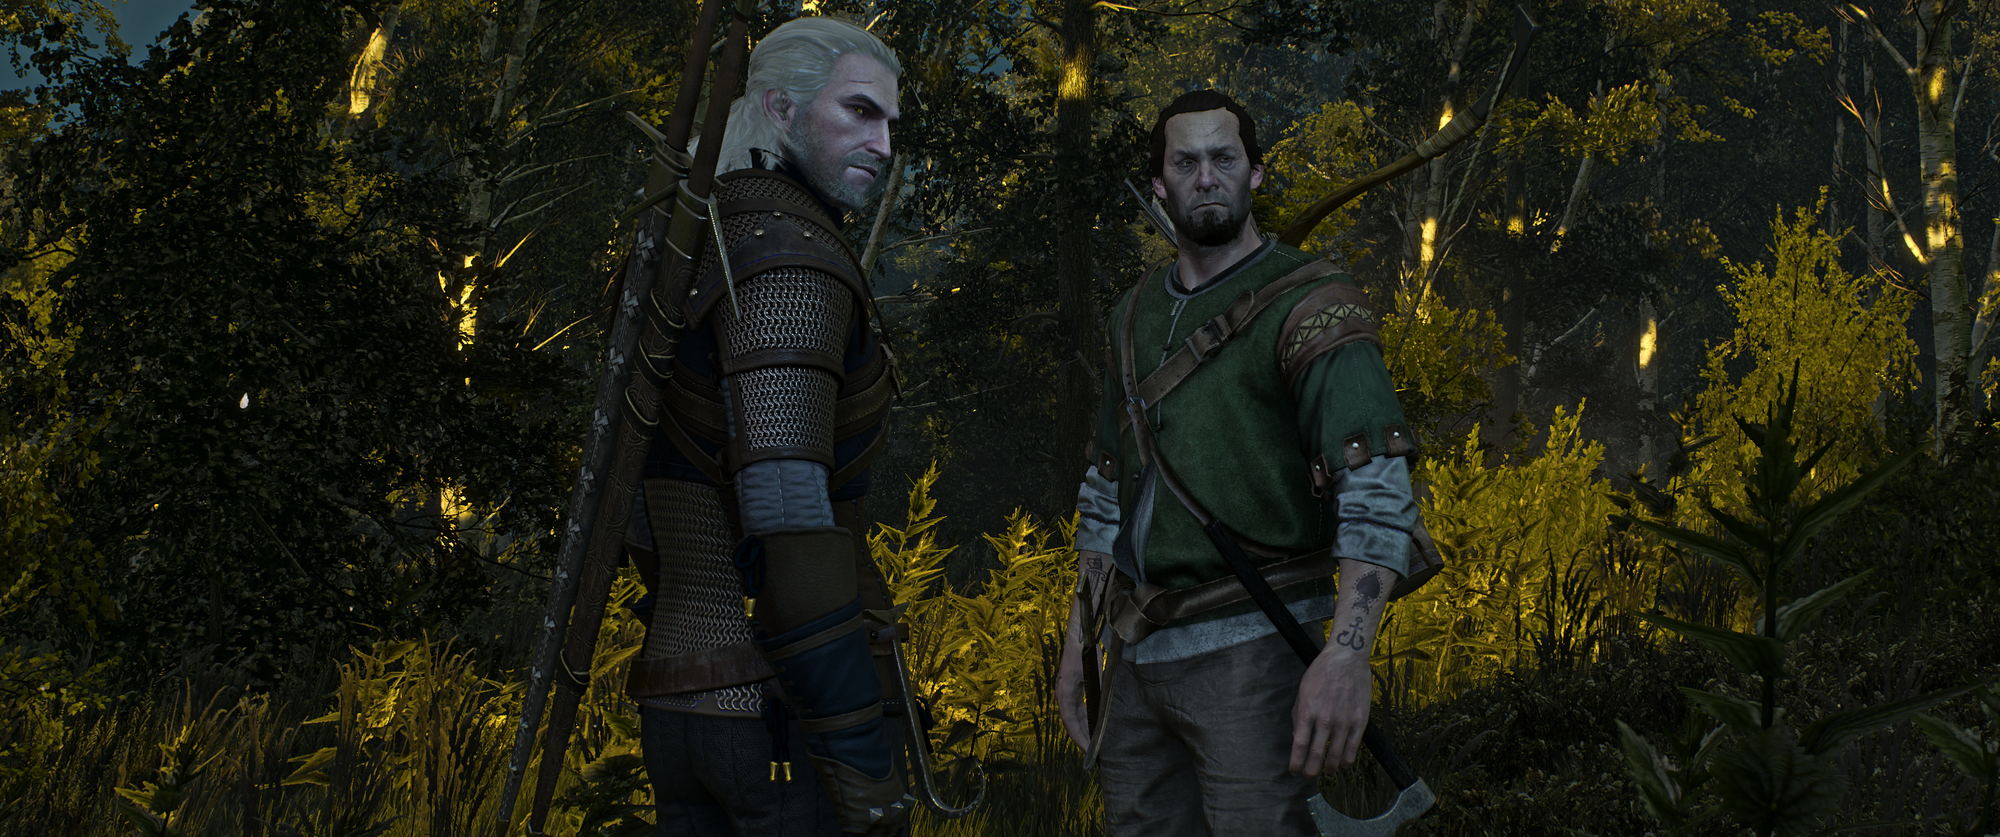 The Witcher 3 Screenshot 2019.01.02 - 20.05.20.90.png